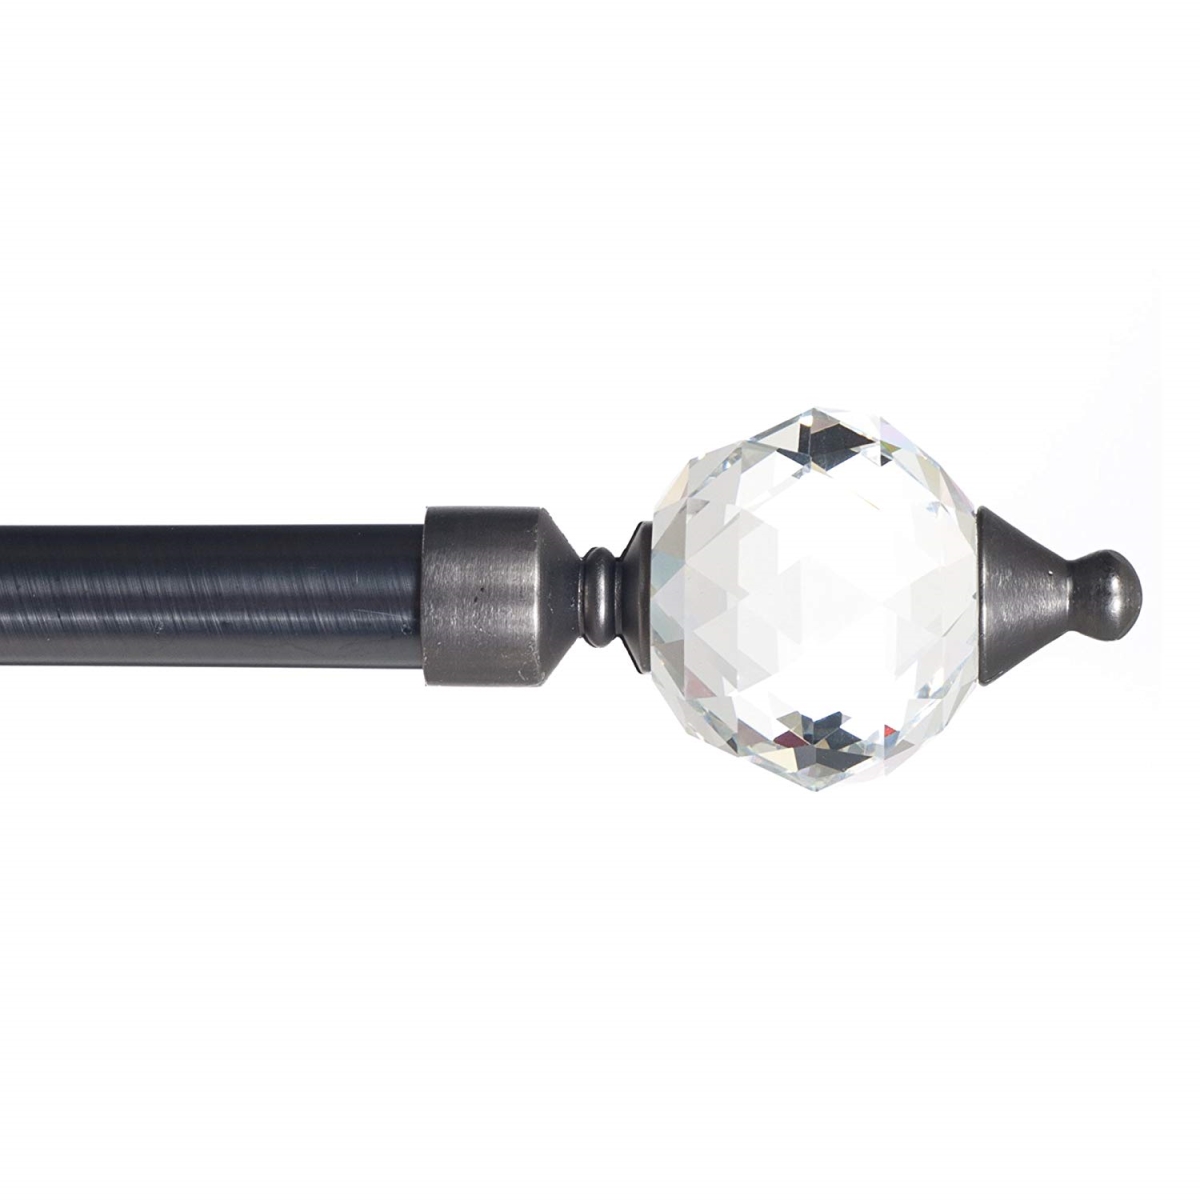 63a-77545 Cone Glass Curtain Rod, Pewter - 0.75 In.